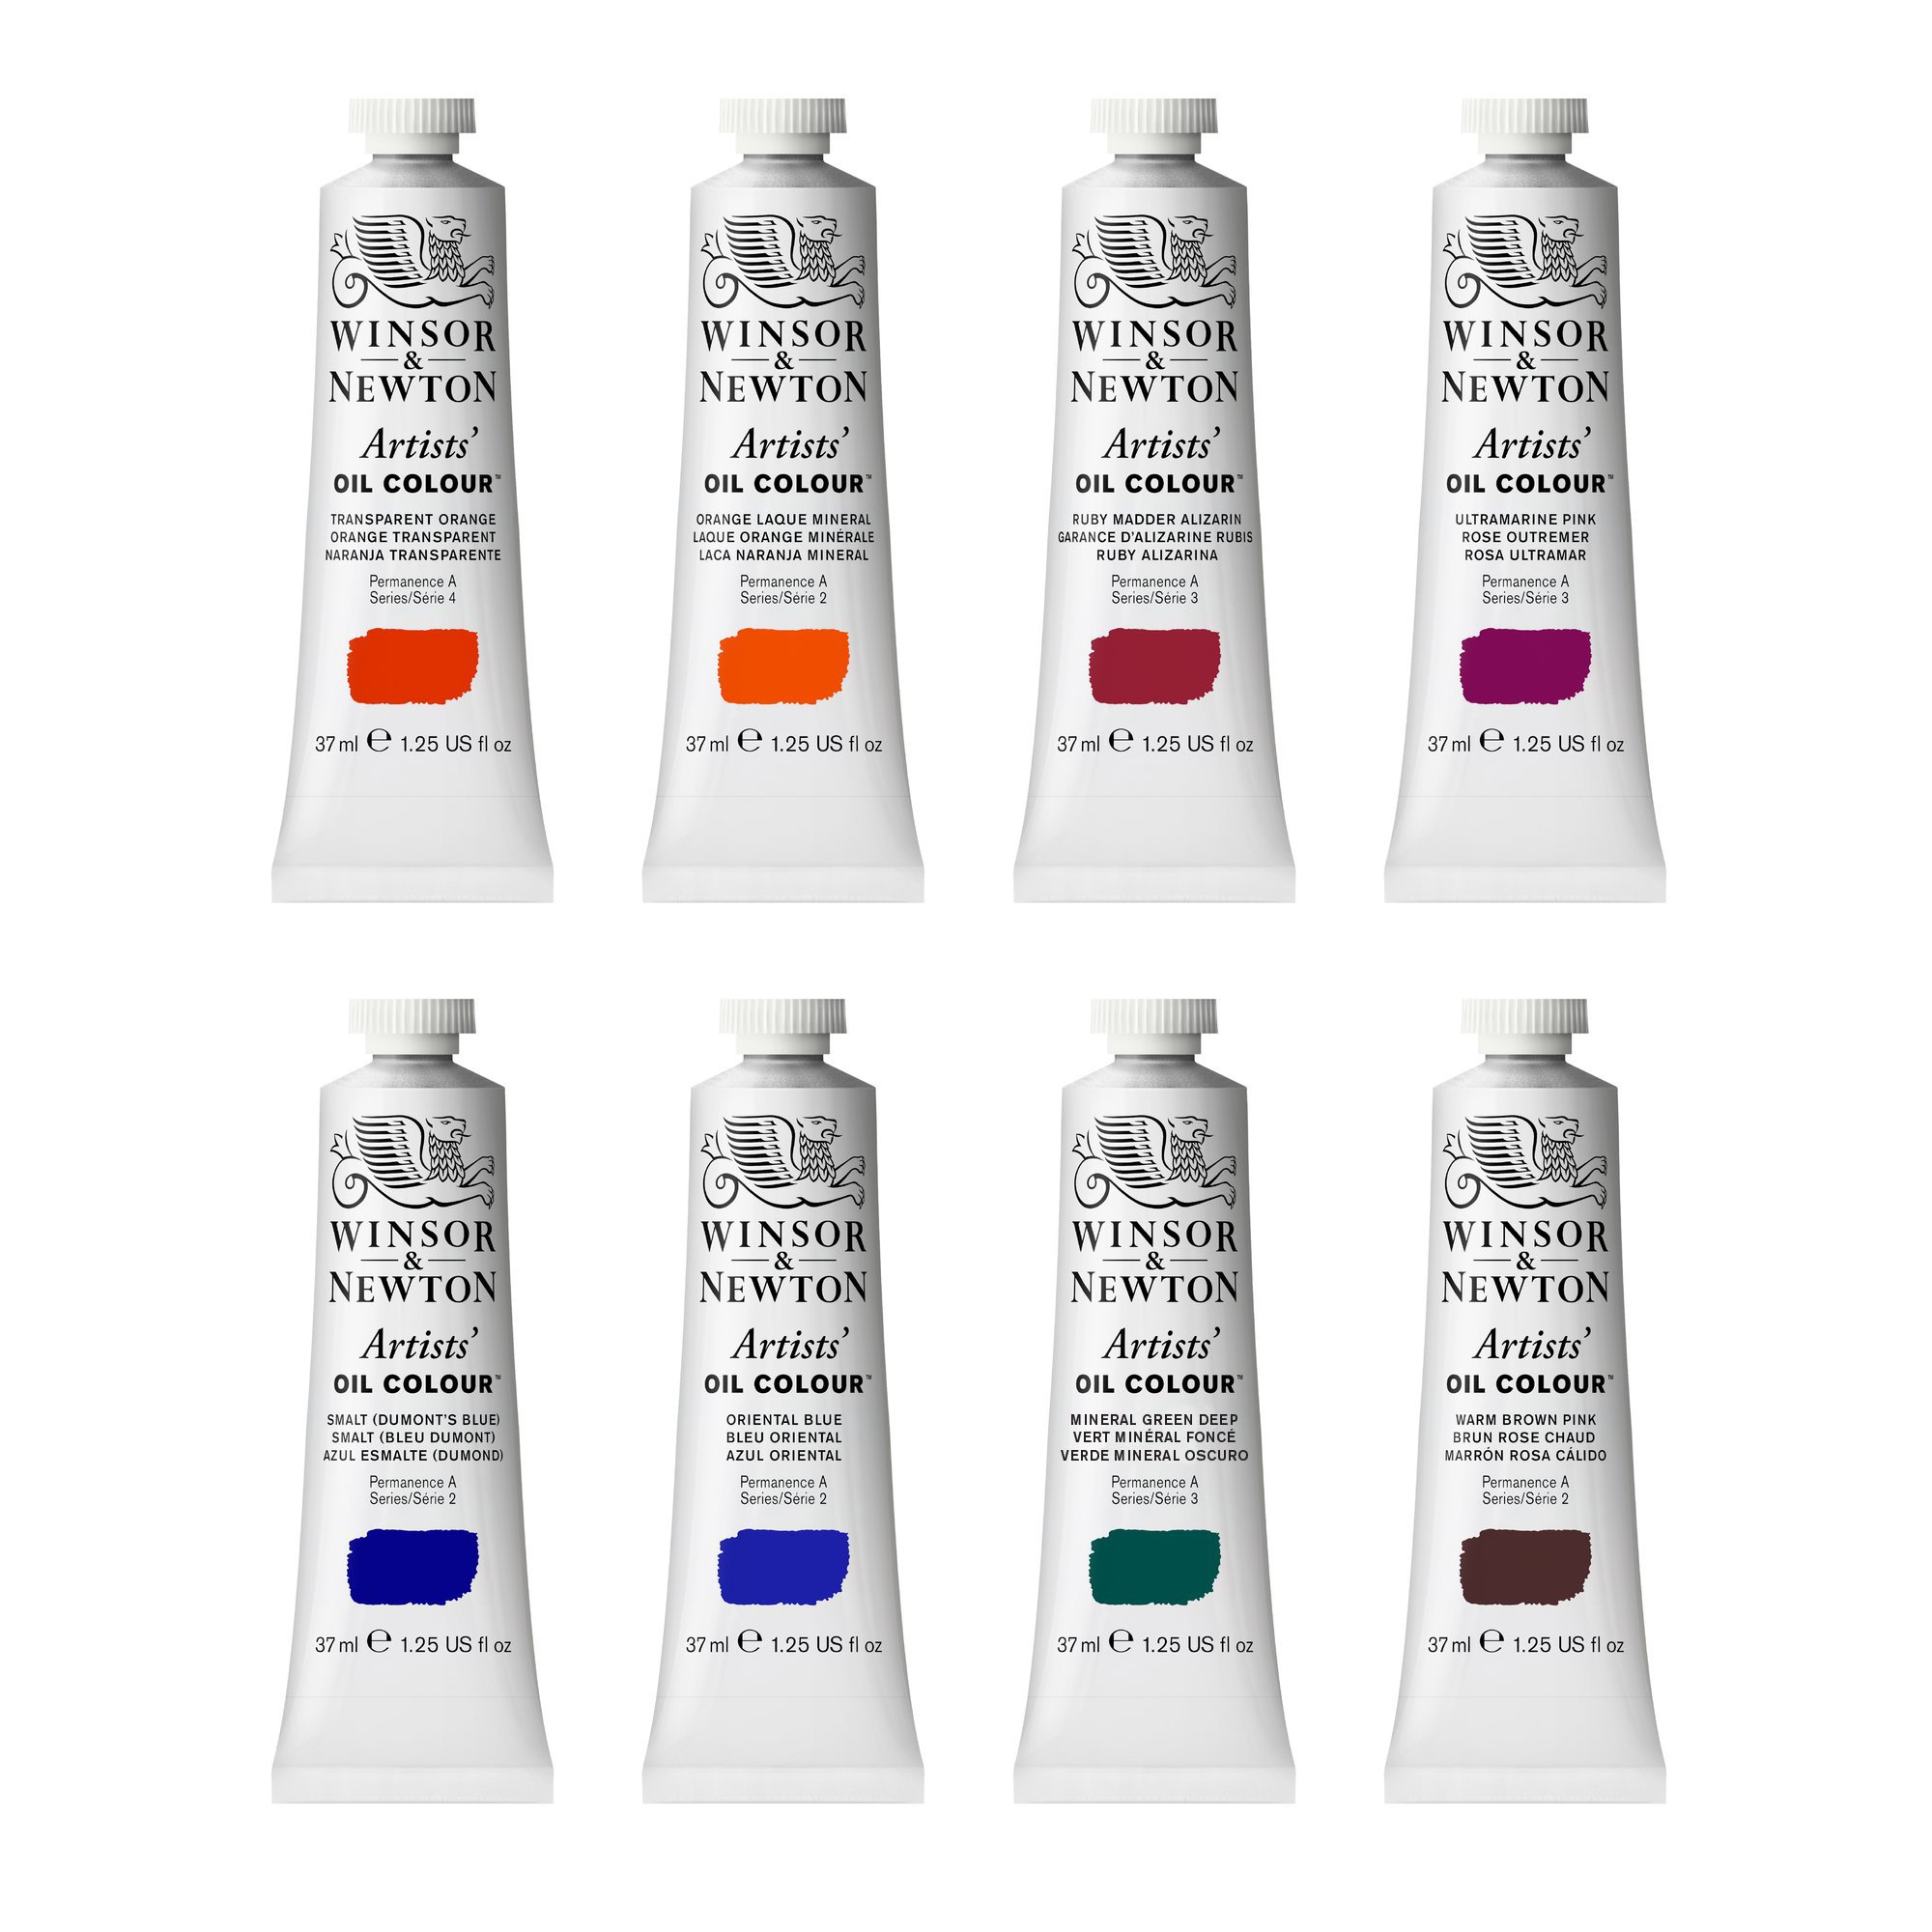 Winsor Newton colors for artists